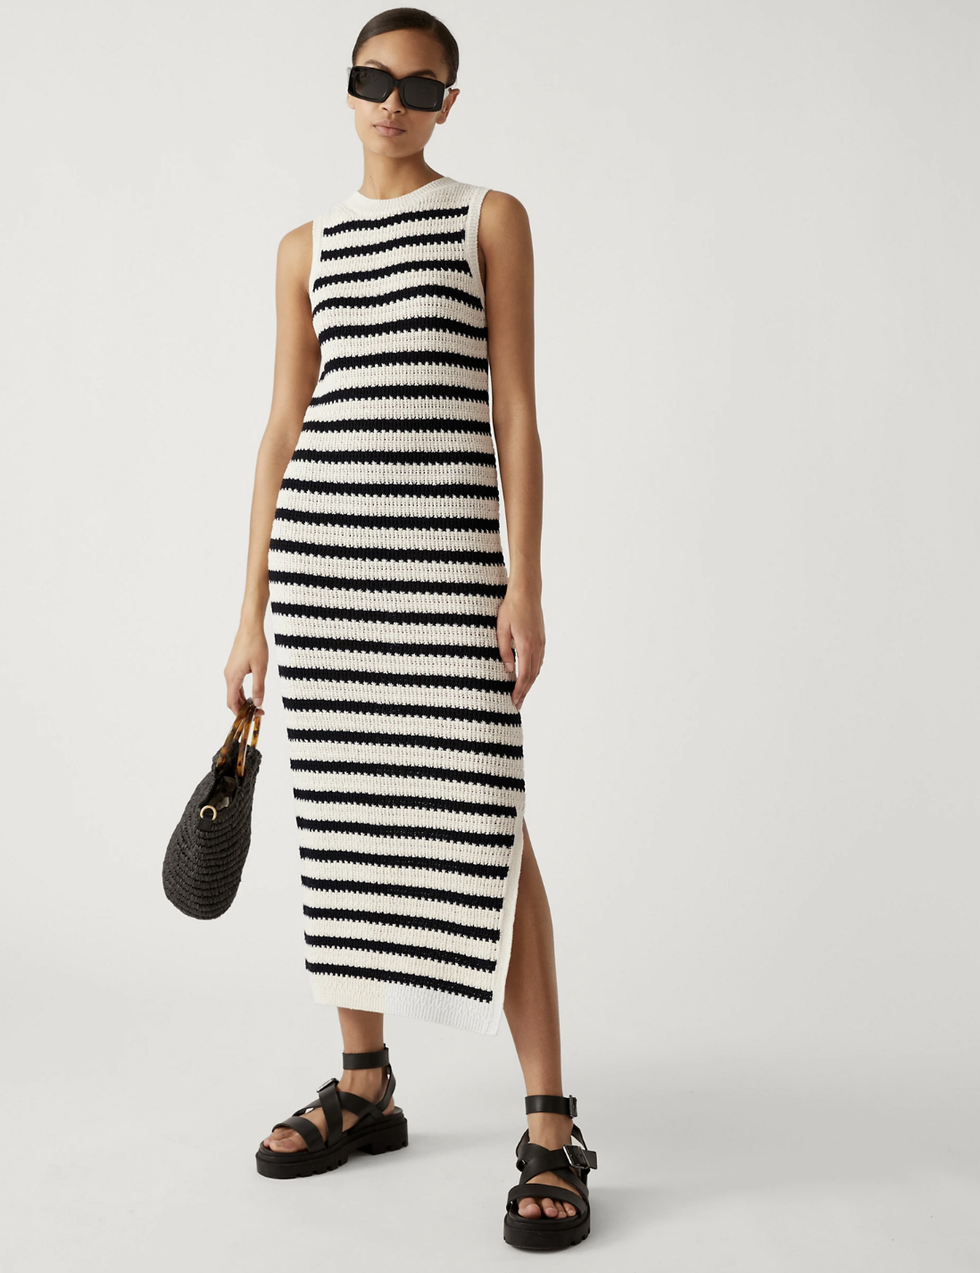 Marks & Spencer's £35 knitted dress is a capsule wardrobe hero